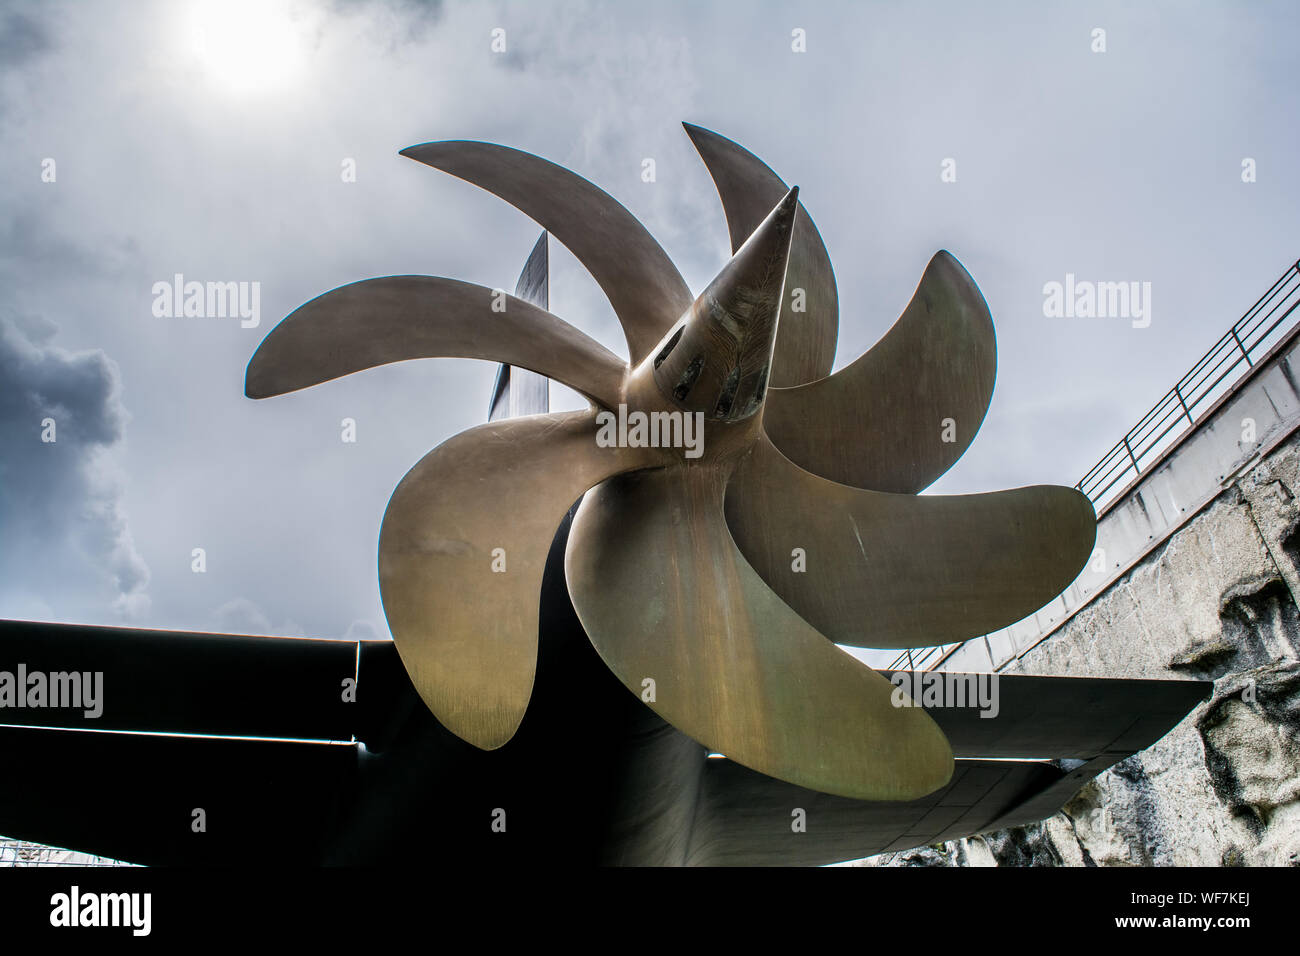 Low Angle View Of Submarine Propeller Against Sky Stock Photo - Alamy